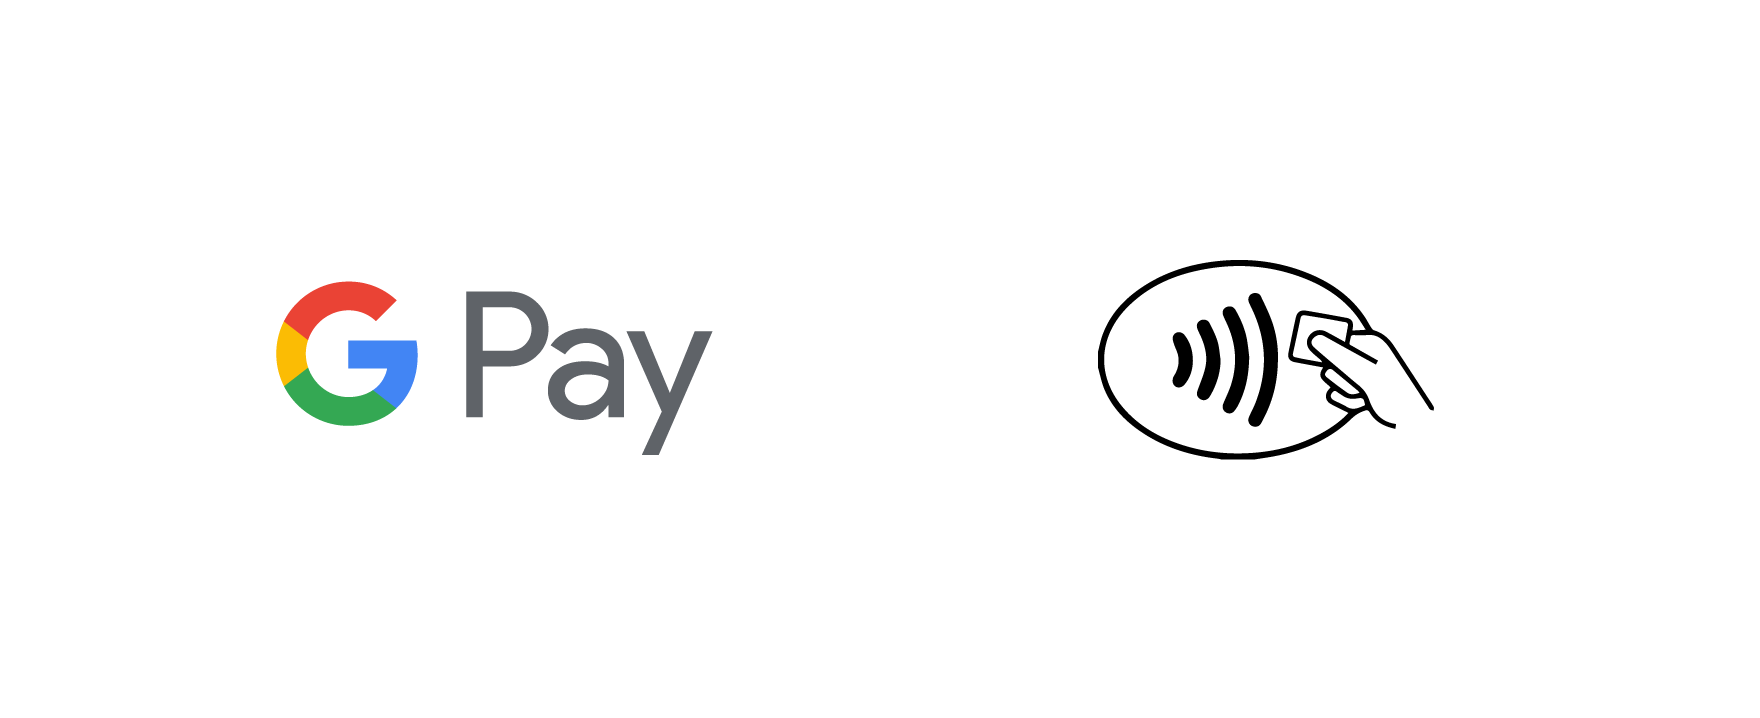 Google Pay icons show where you can use Pleo with Google Pay